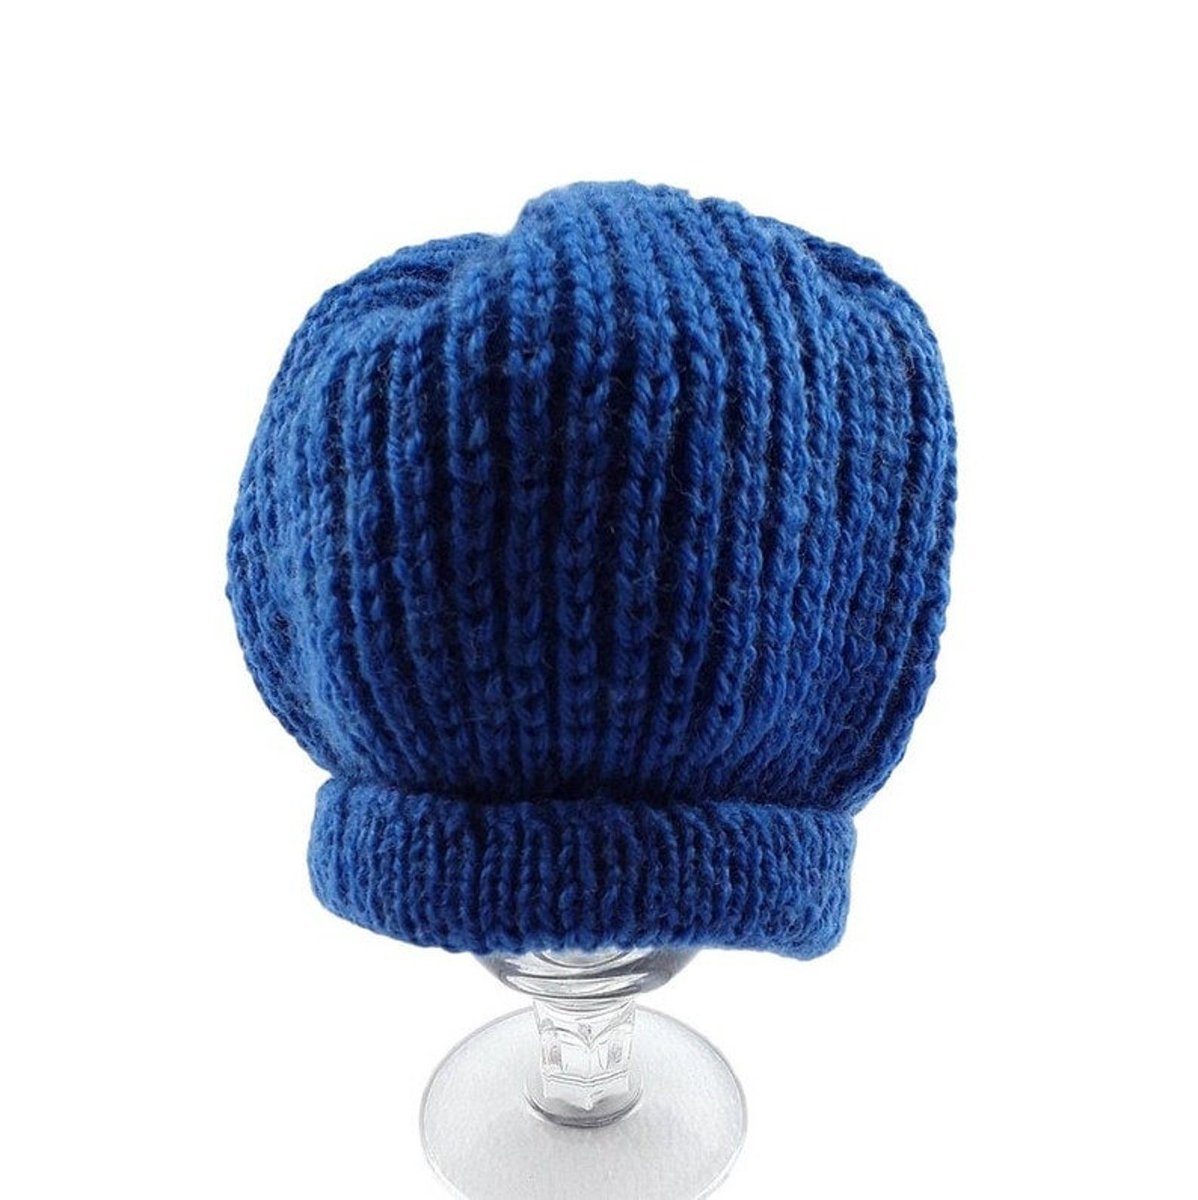 Keep your little ones cozy and stylish with this hand-knitted ribbed baby hat in blue. Ideal for 6-12 months old. Shop now on #Etsy from #Knittingtopia. #Supportsmallbusinesses and treasure unique finds. knittingtopia.etsy.com/listing/167945… #handmade #babyhat #MHHSBD #craftbizparty